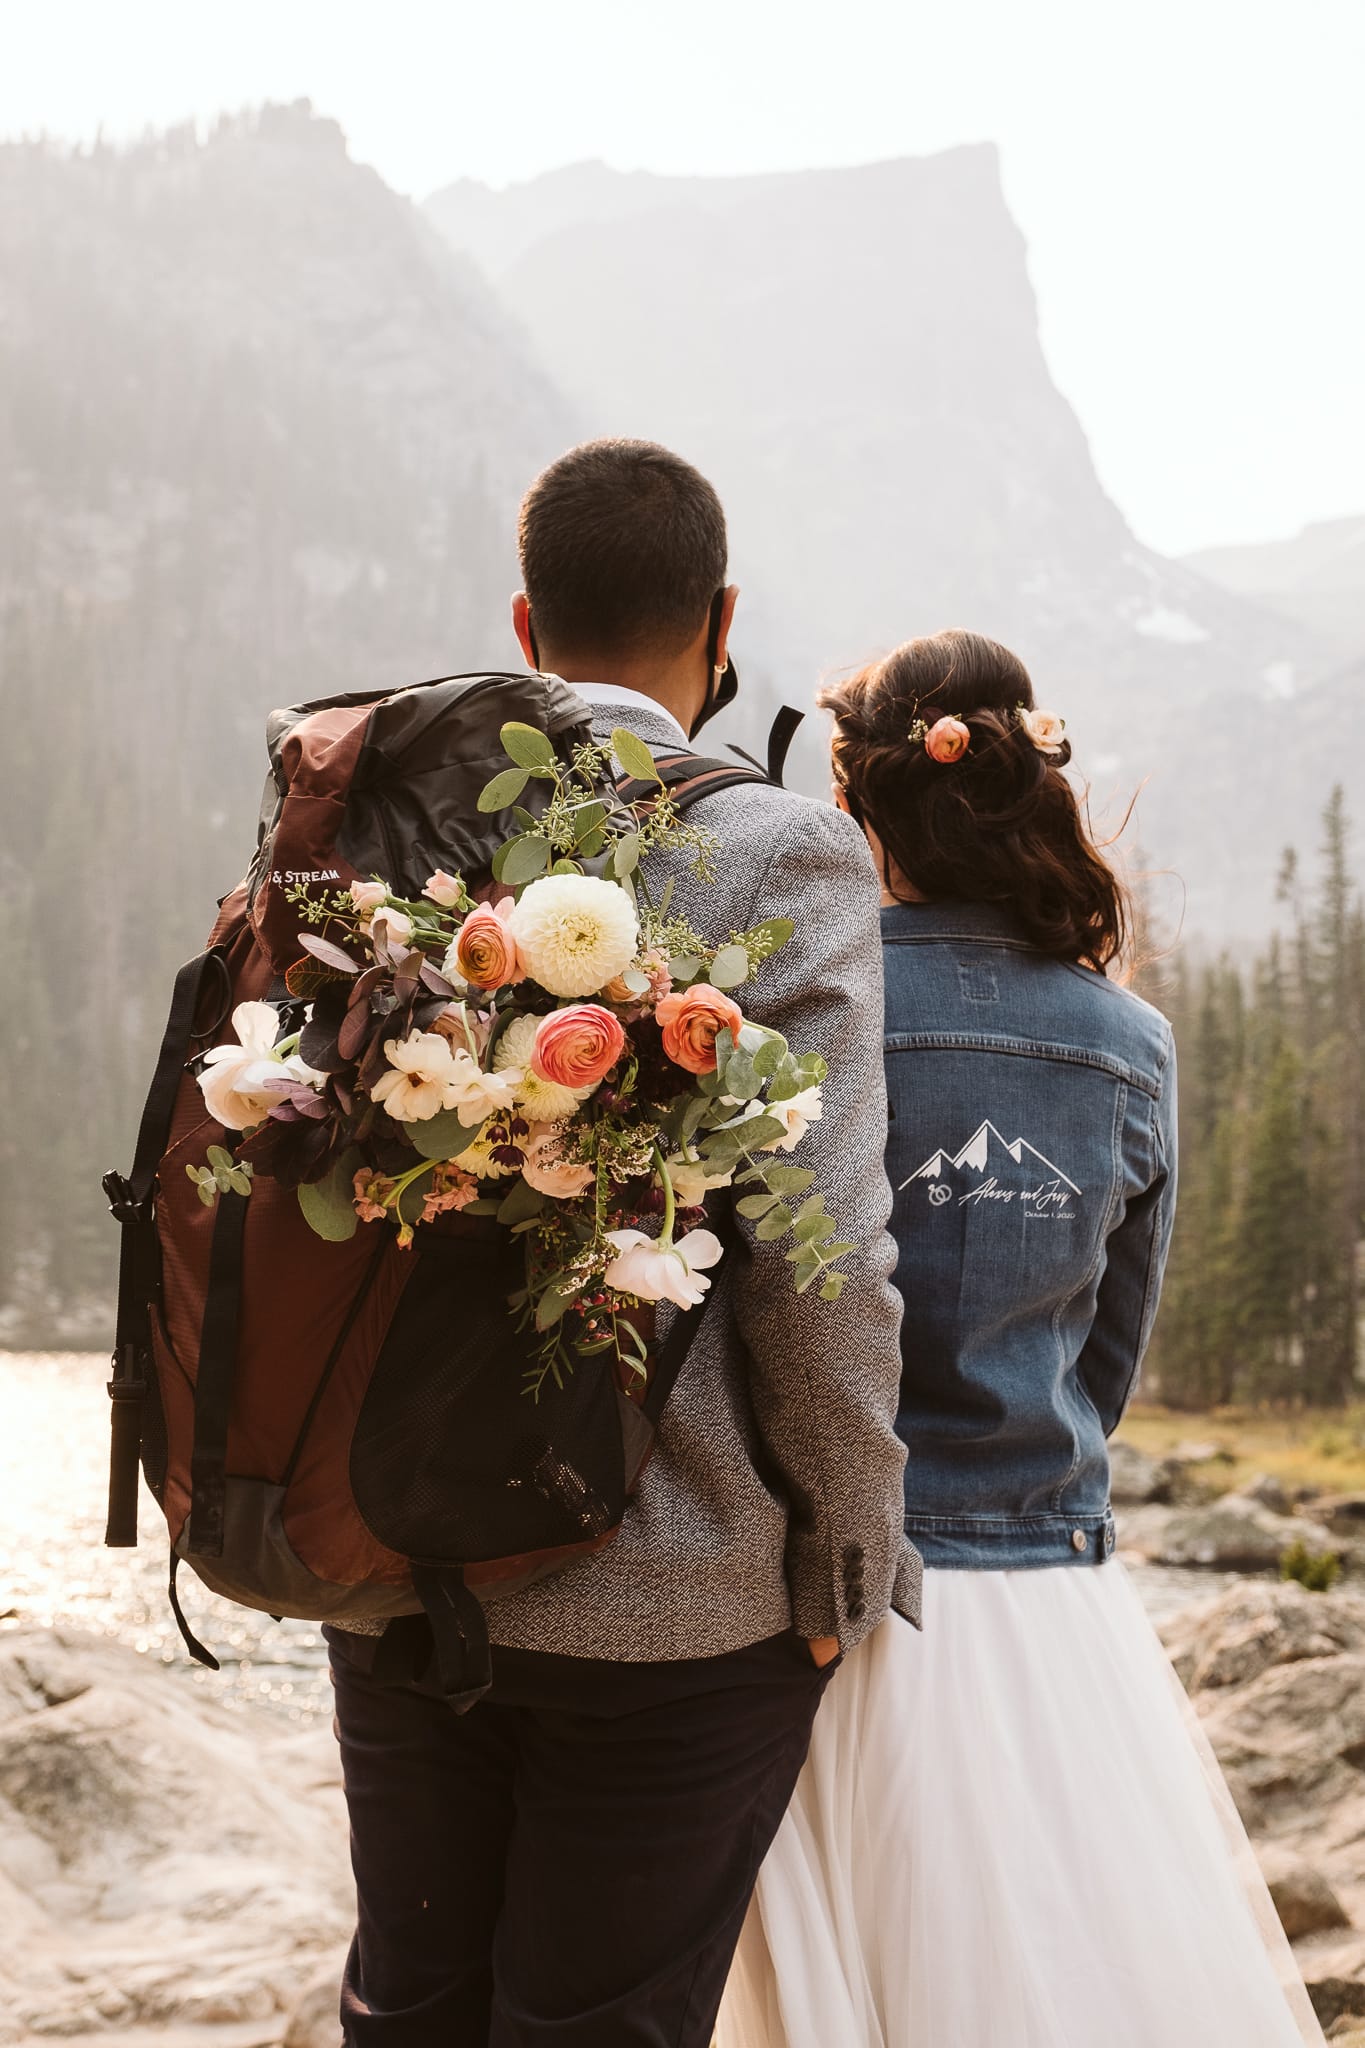 Hiking backpack with adventure elopement gear